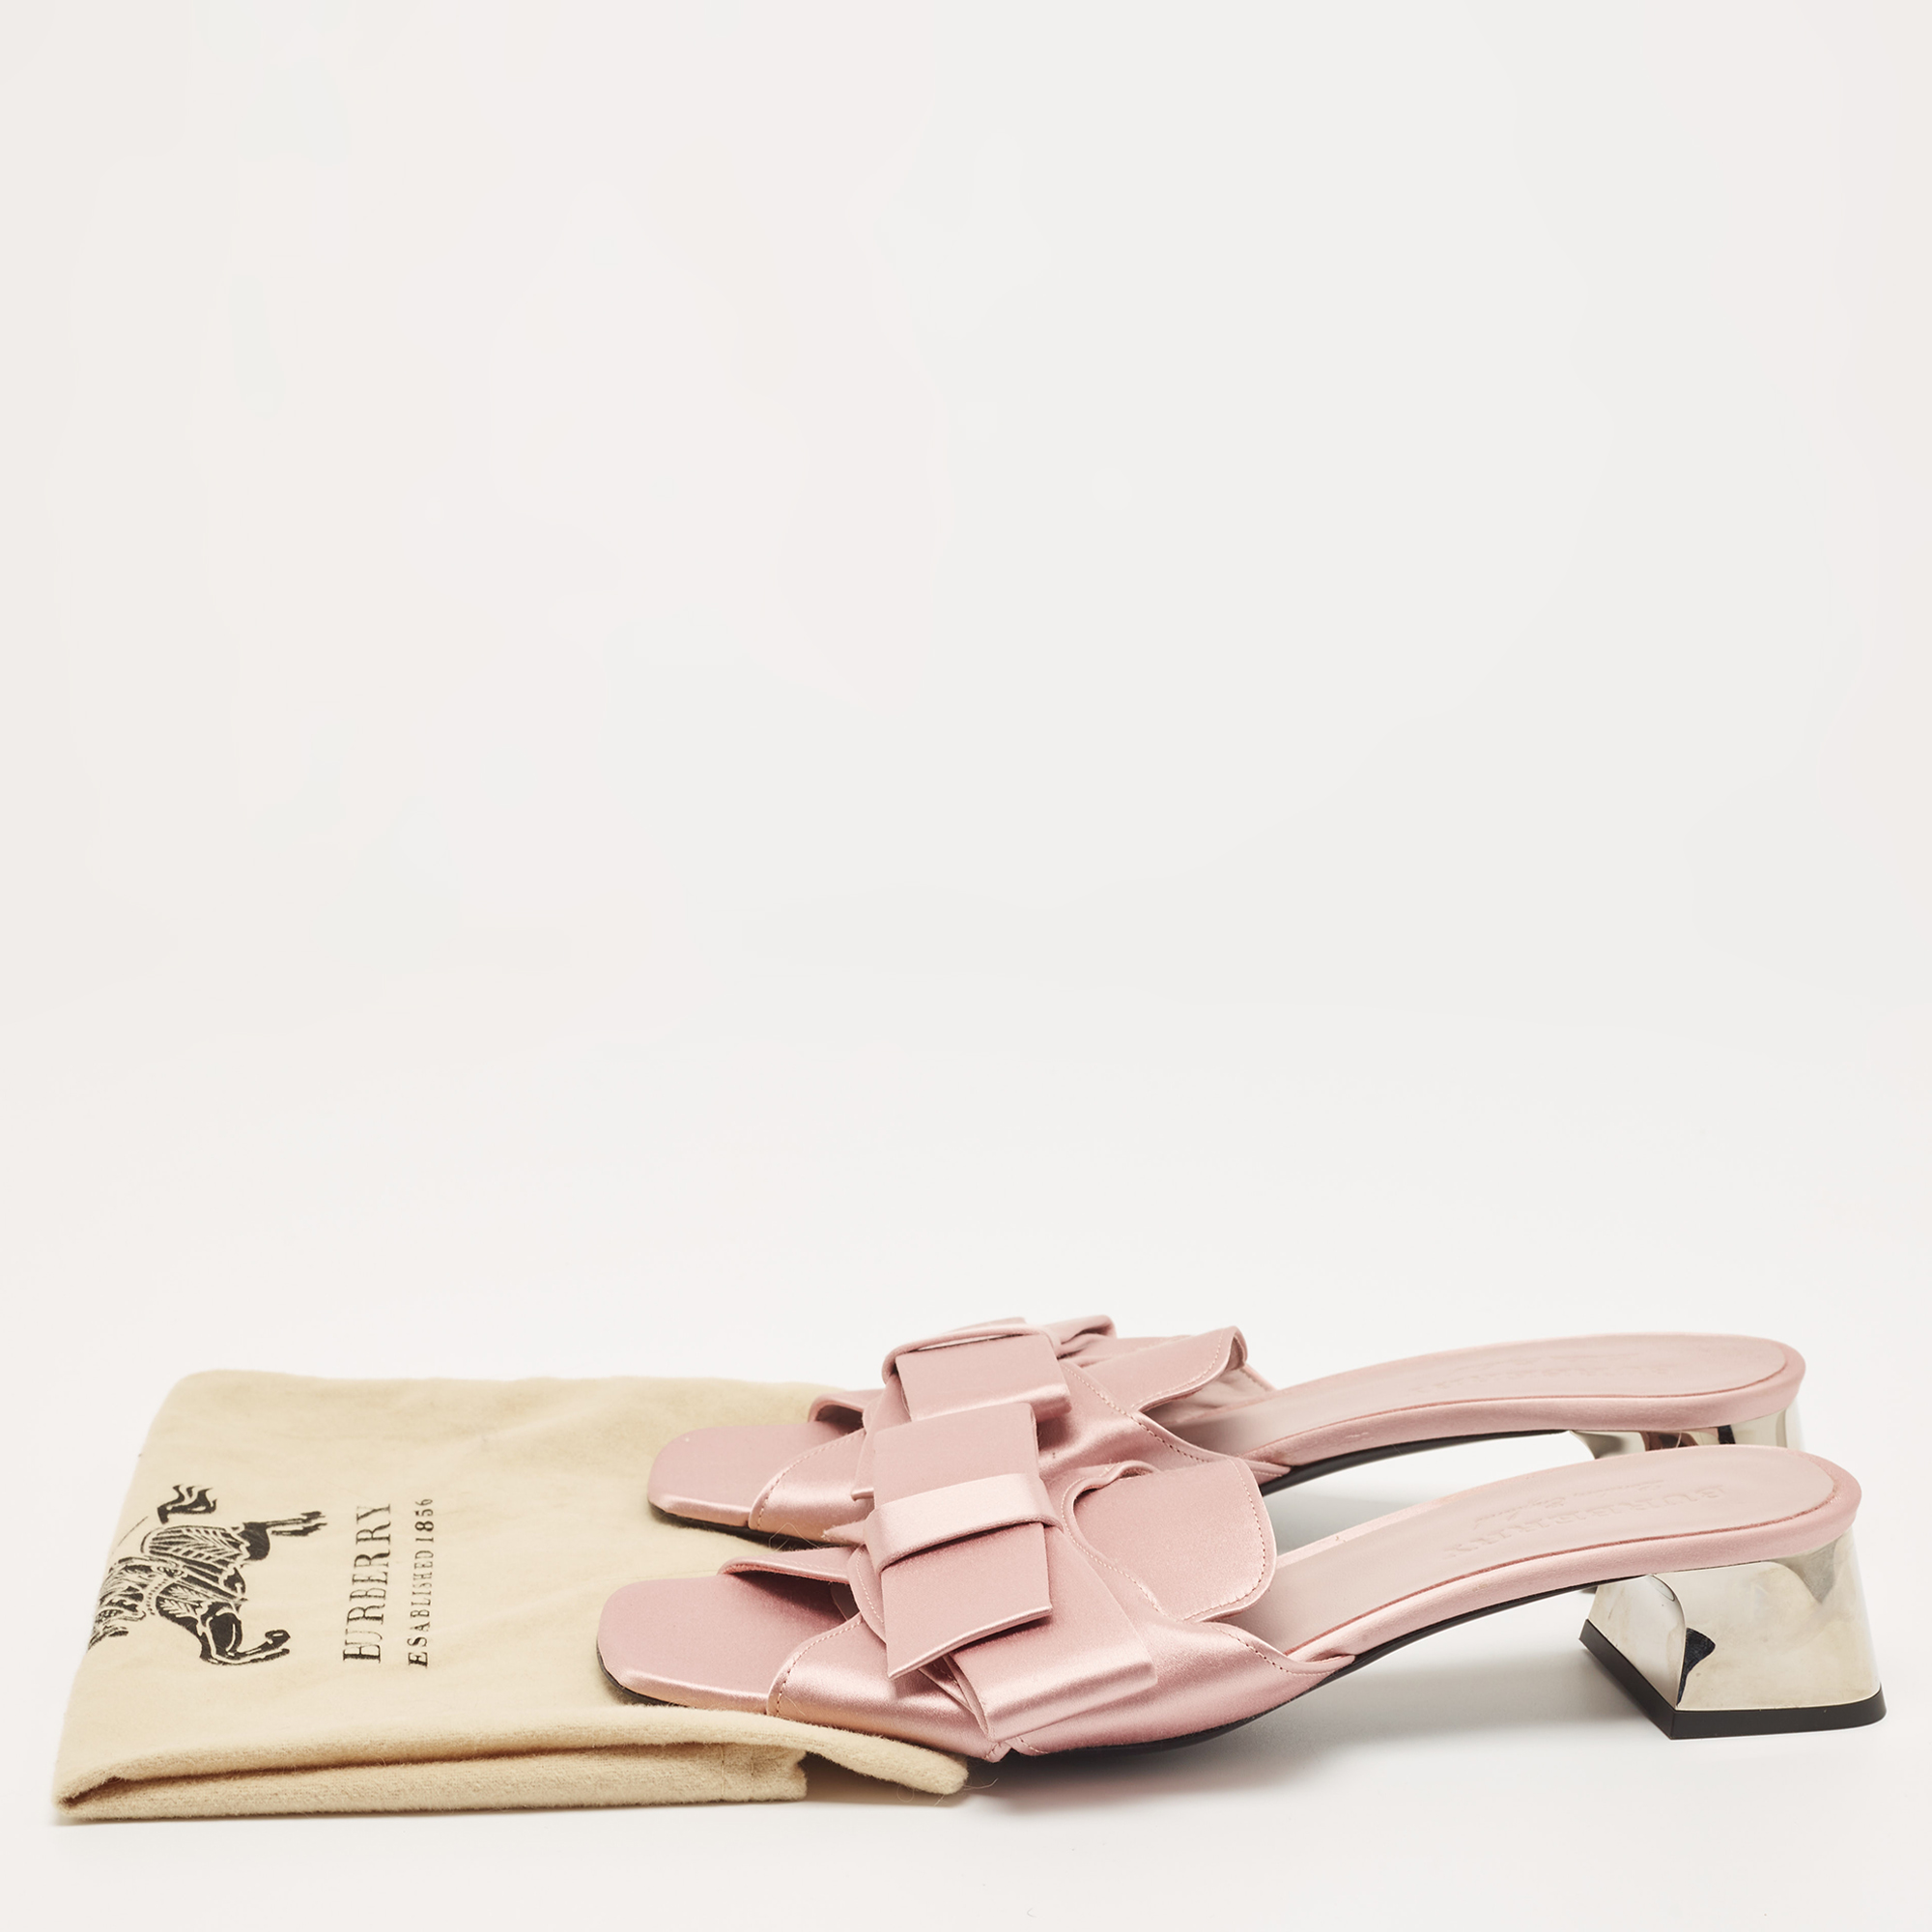 Burberry Pink Satin Bow Mules  Size 41